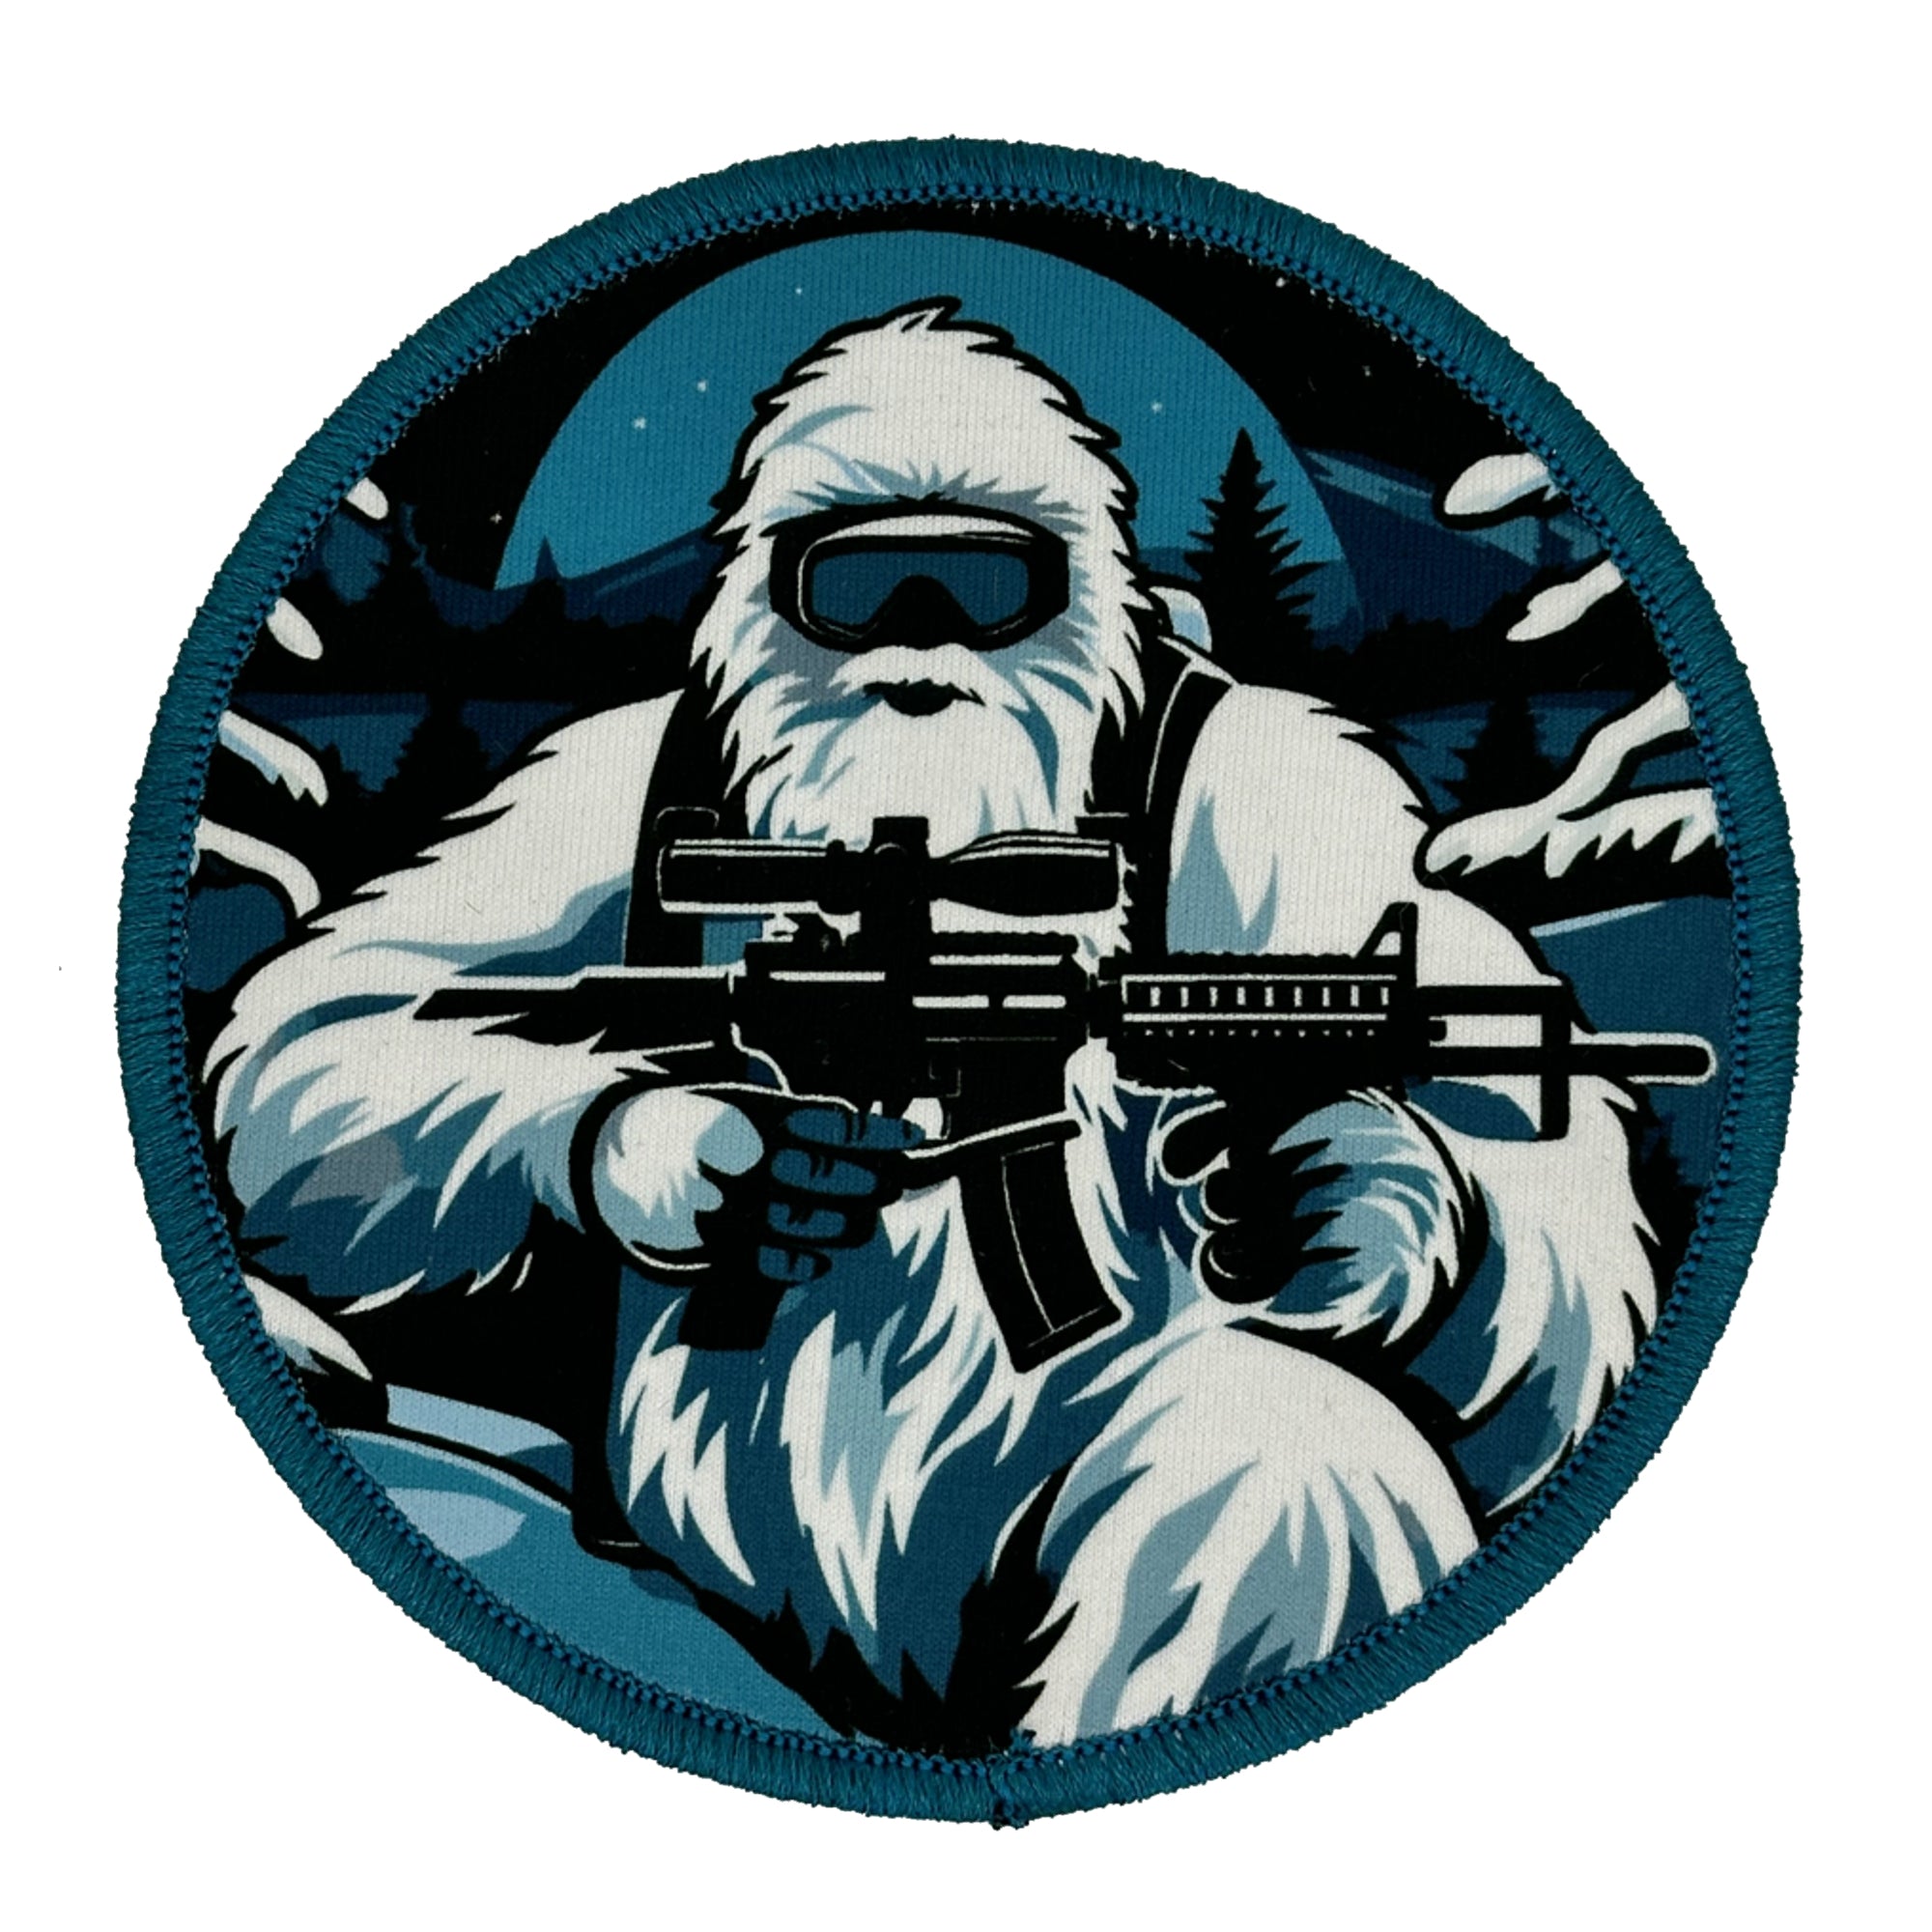 Alpine Avenger: Tactical Yeti Patch – The Mountain Warfare Master! 4" Round Sublimated Patch